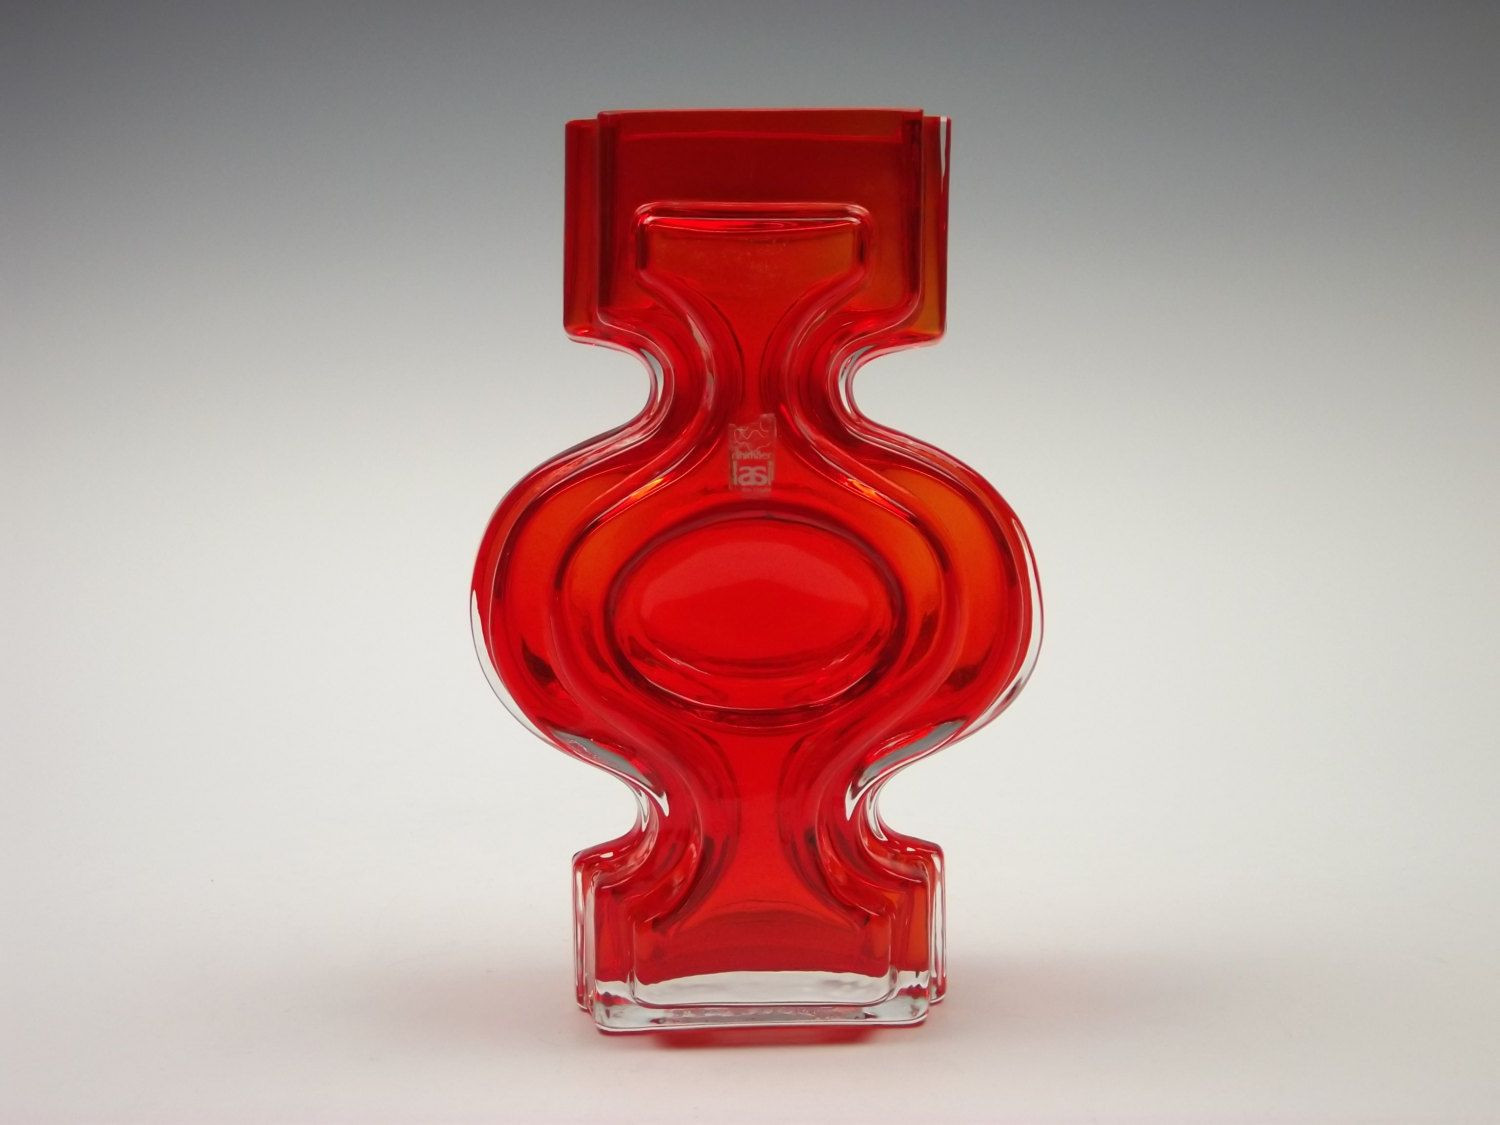 ruby red vase of riihimaki kaappikello pirtti olive green glass vase by hel throughout riihimaki emma red glass vase by helena tynell